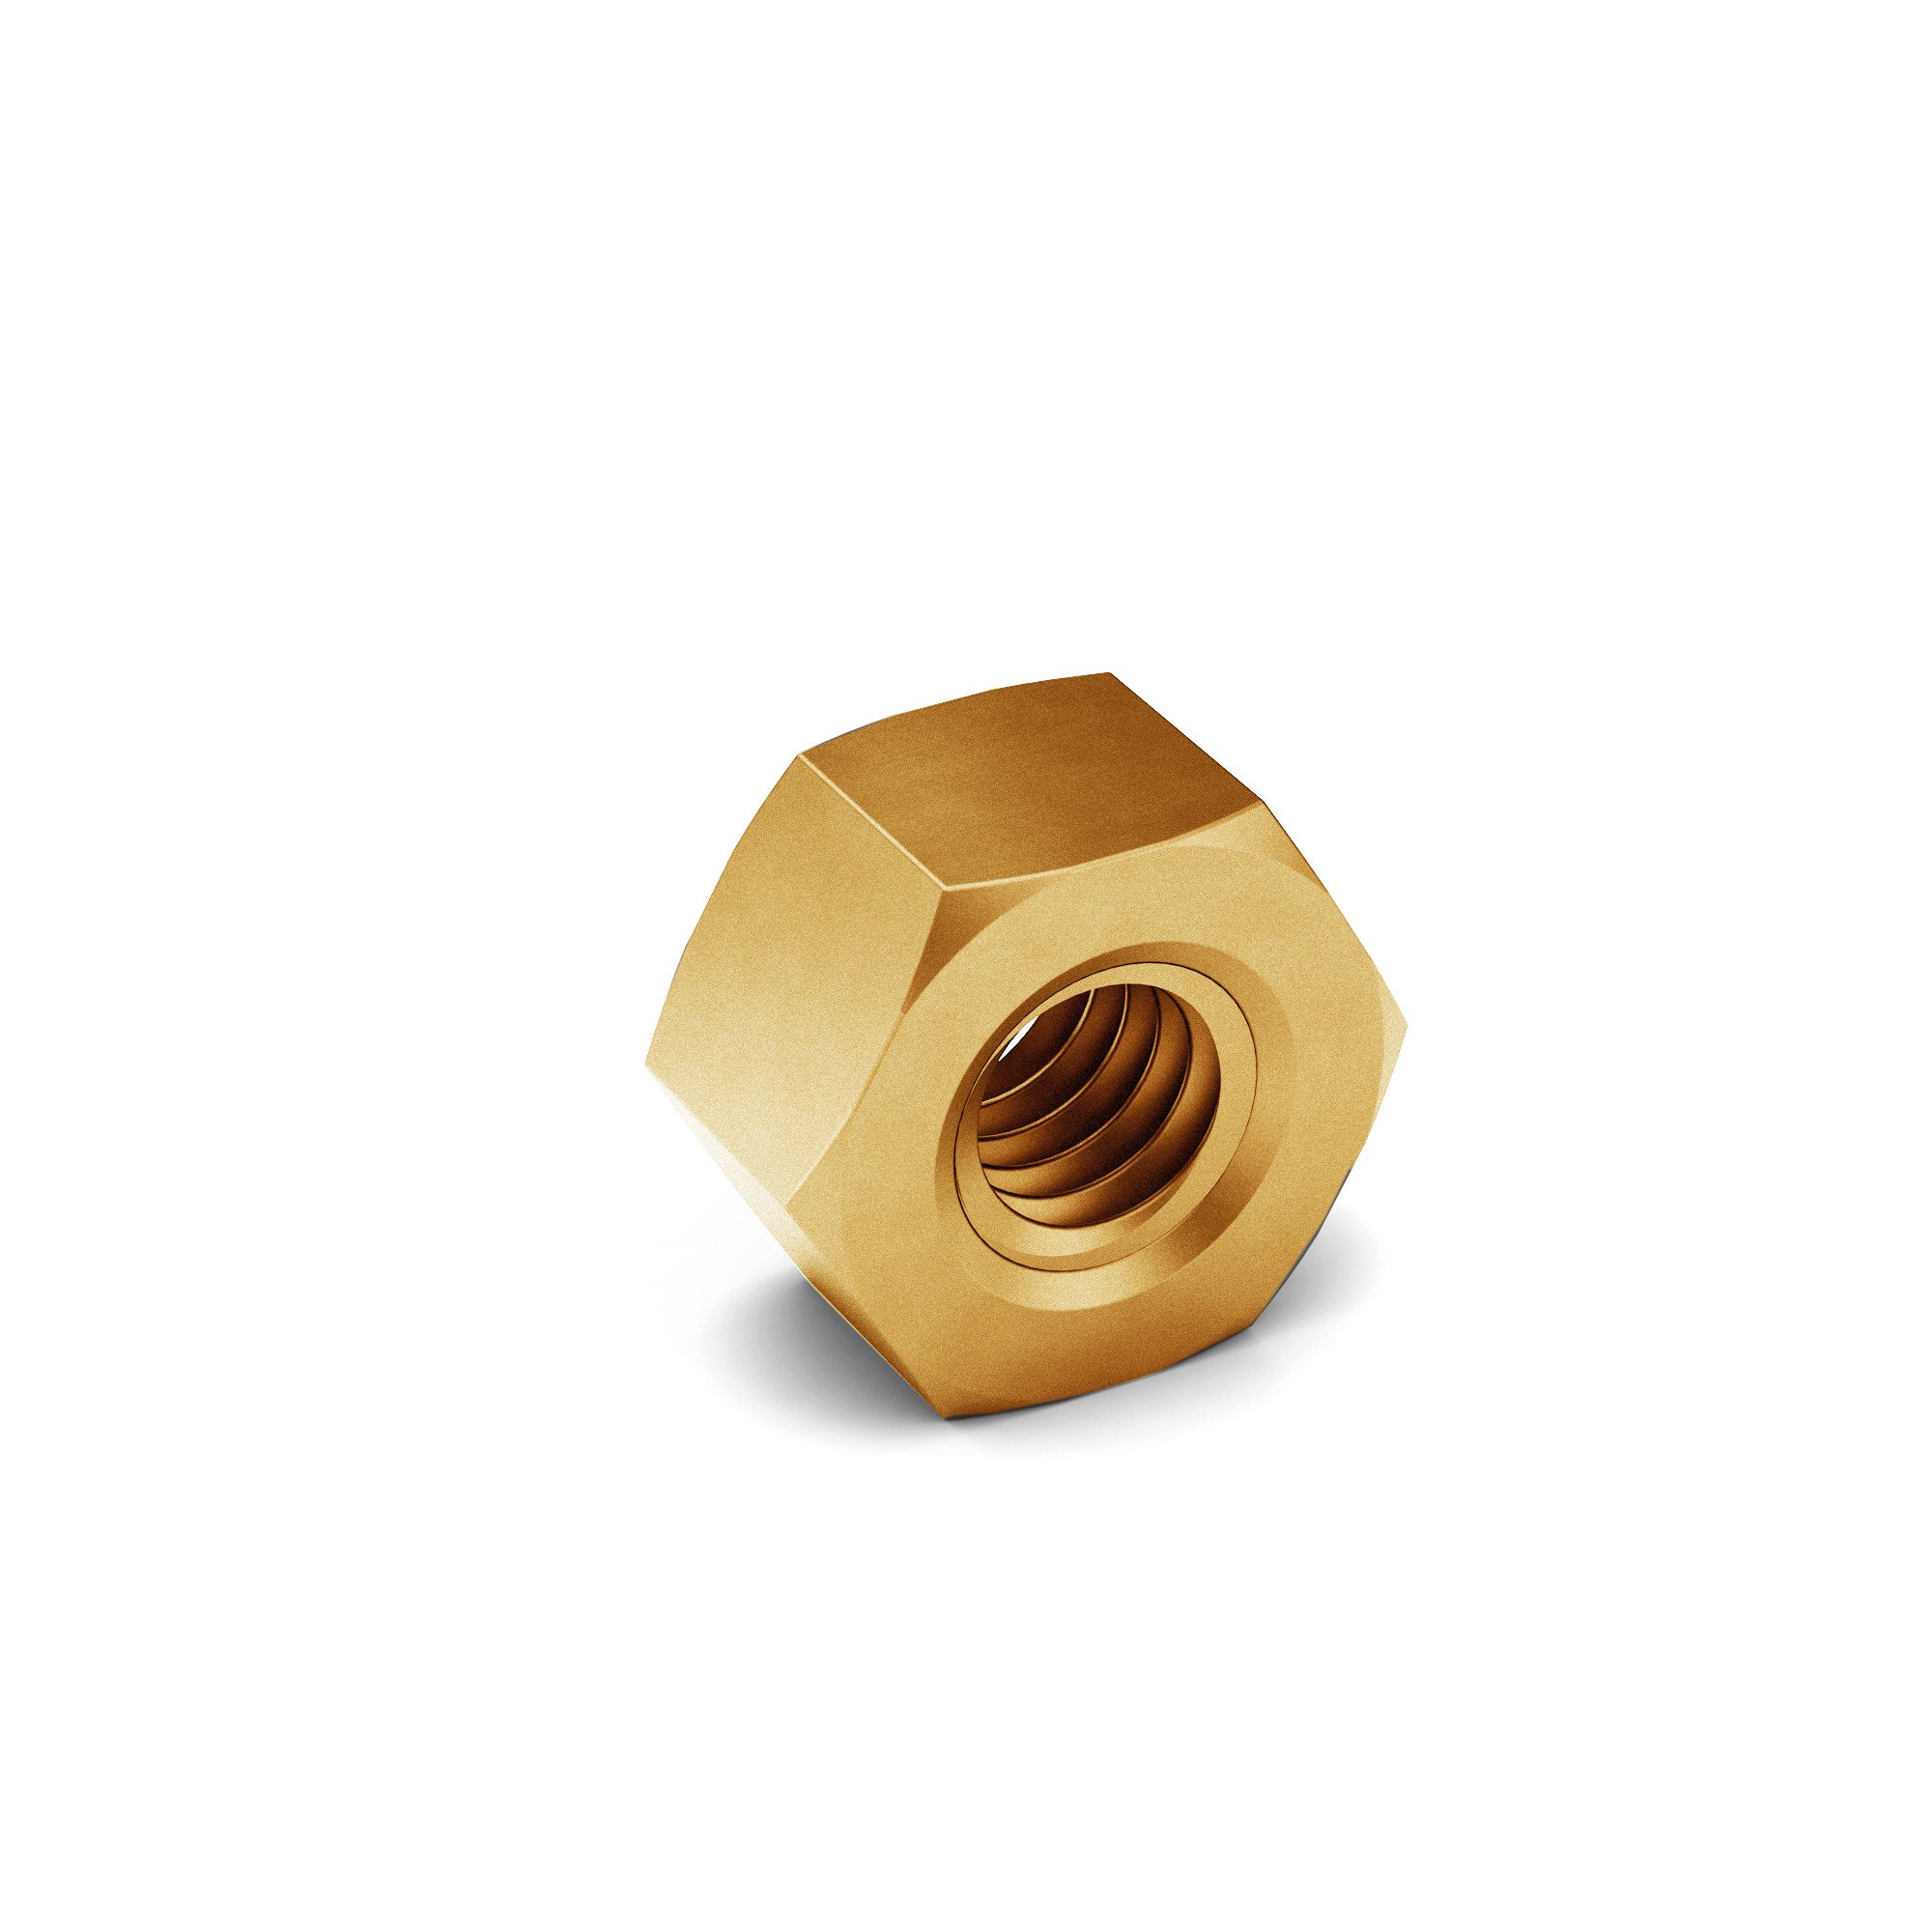 7/16-14 J995 GR 8 Hex Nut Zinc Yellow Made in USA